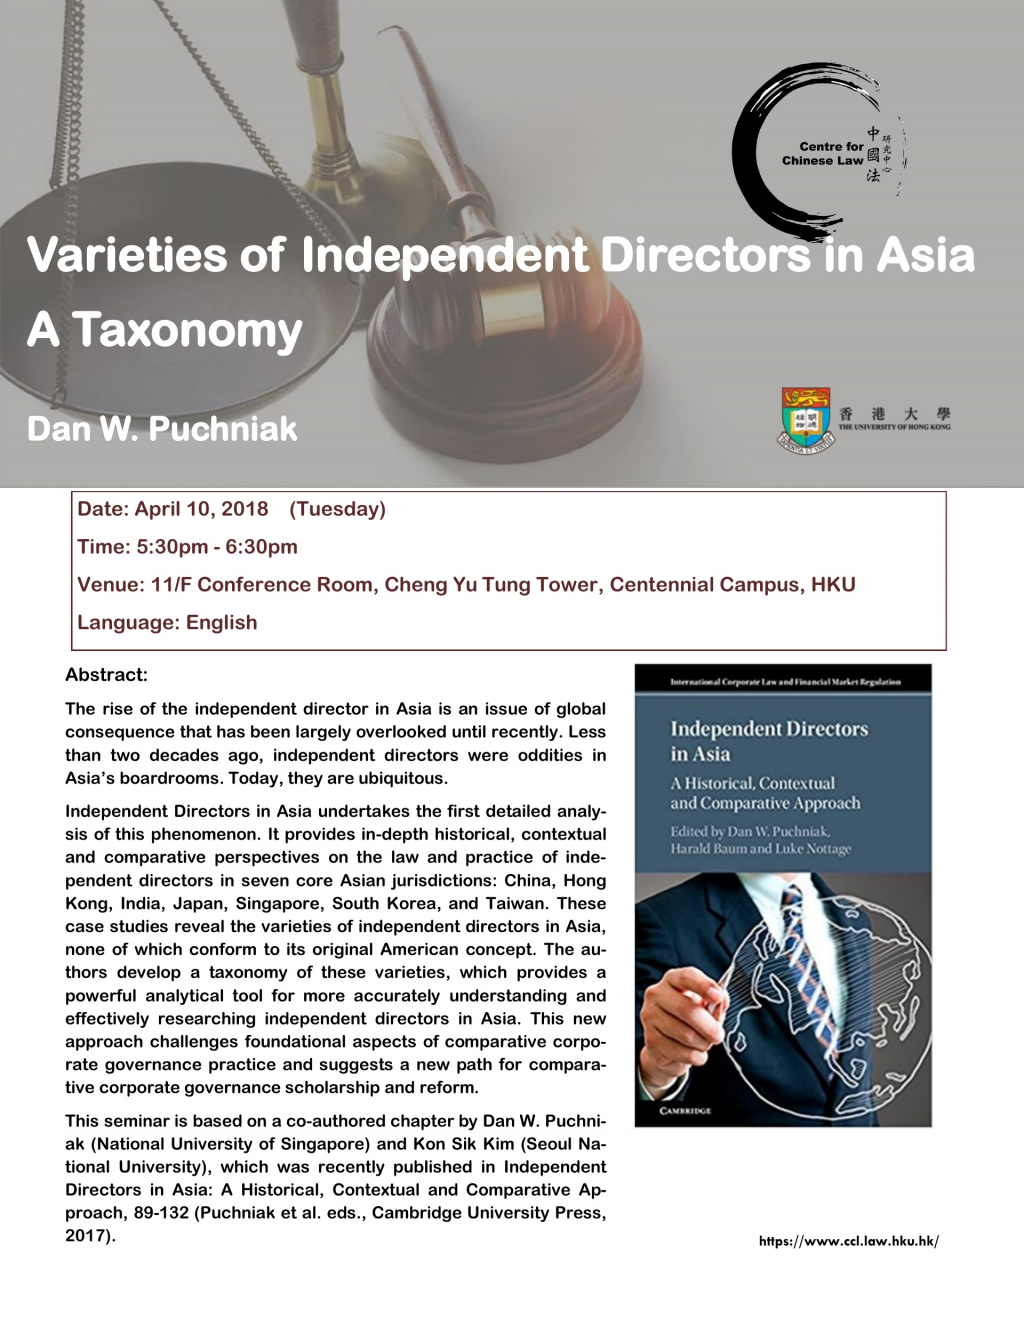 Varieties of Independent Directors in Asia - A Taxonomy